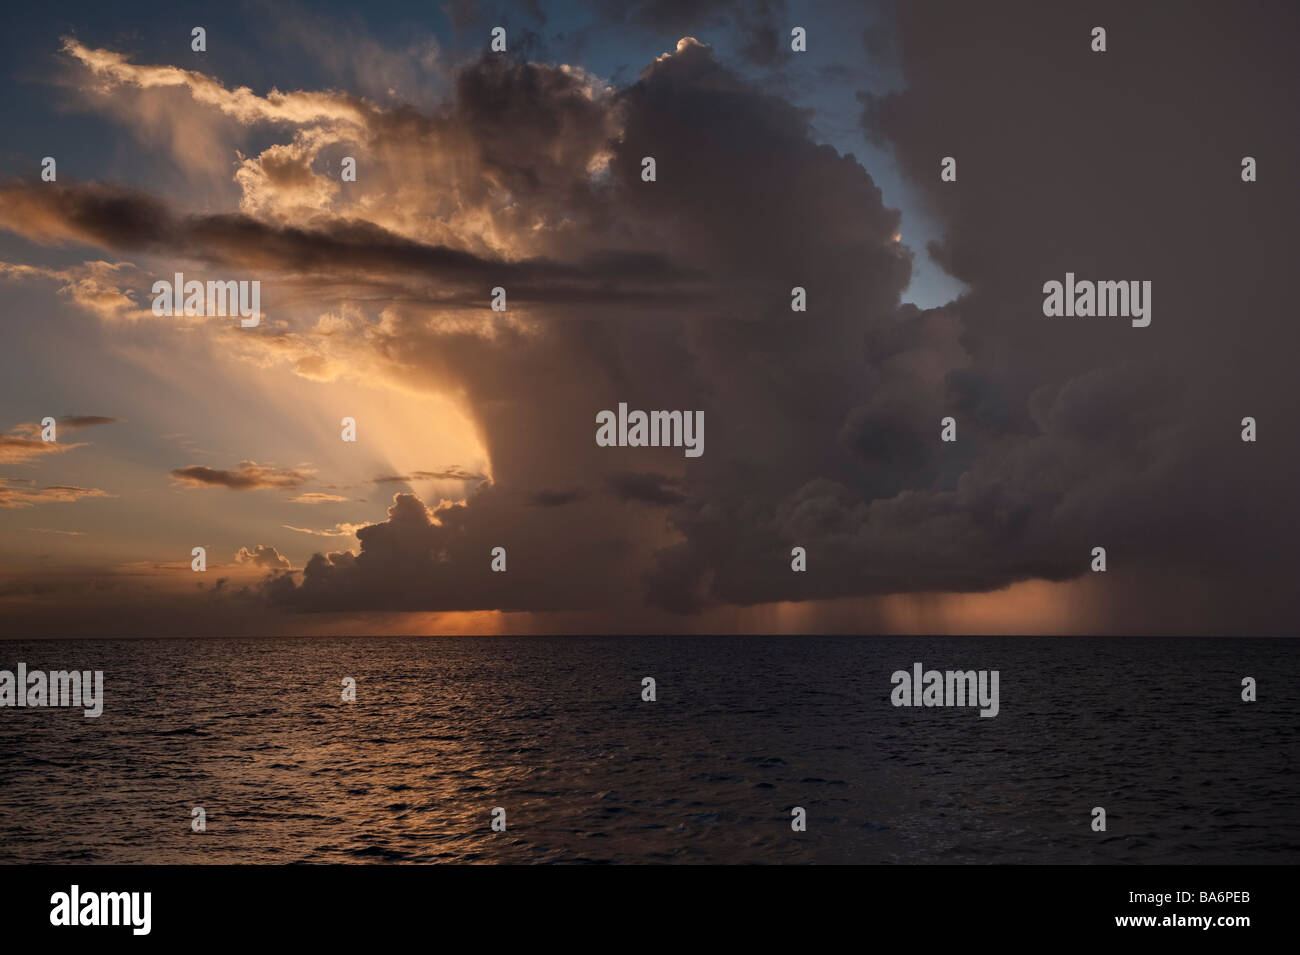 Stormy sky at sunset over the Caribbean Sea Stock Photo